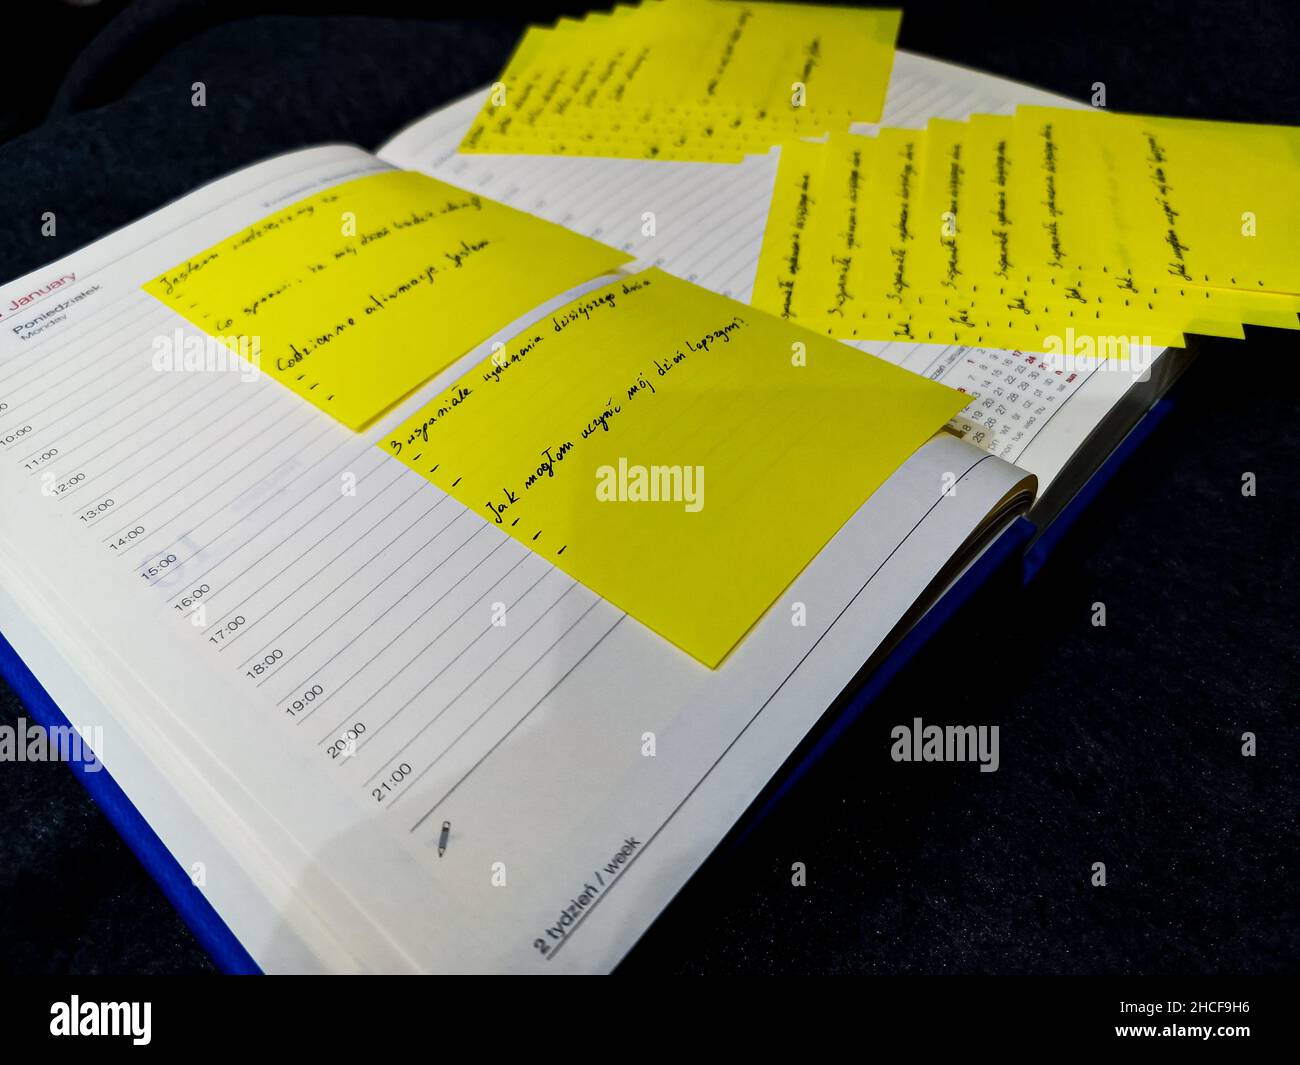 Opened book calendar and daily planner with hours and lines of a day full of yellow sticky notes with writings on it Stock Photo